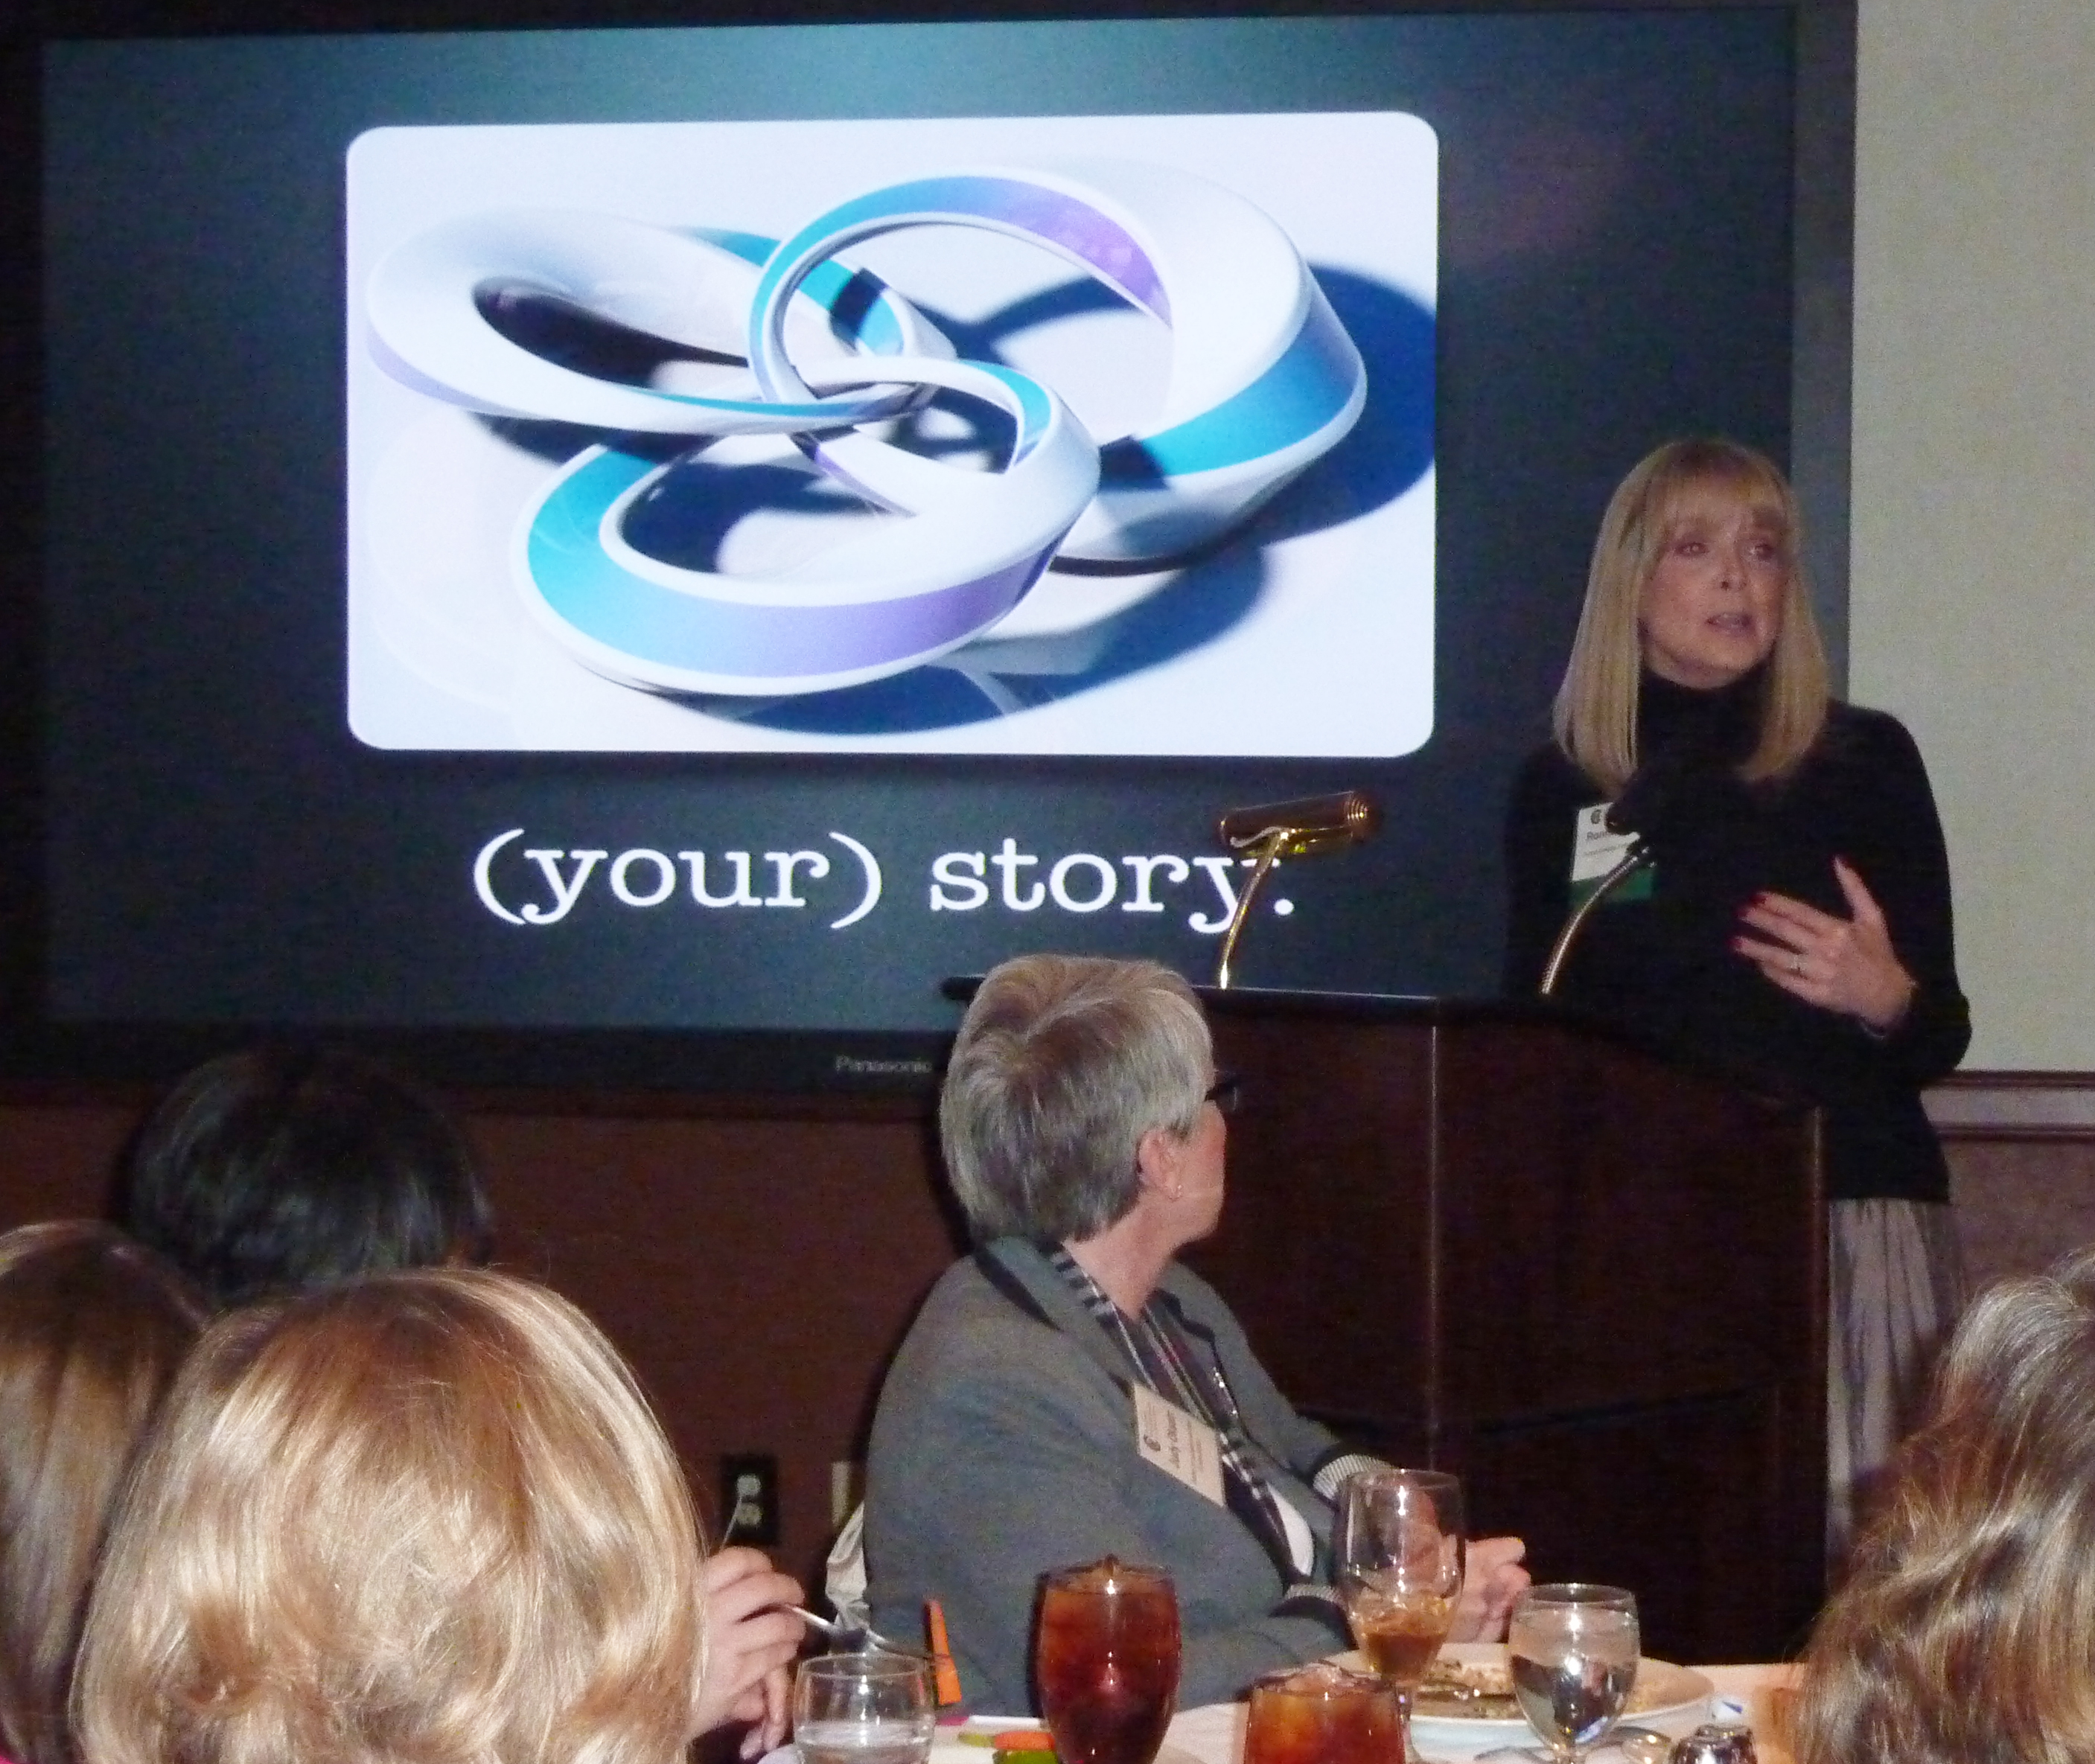 January luncheon recap: Sharing your brand promise through storytelling